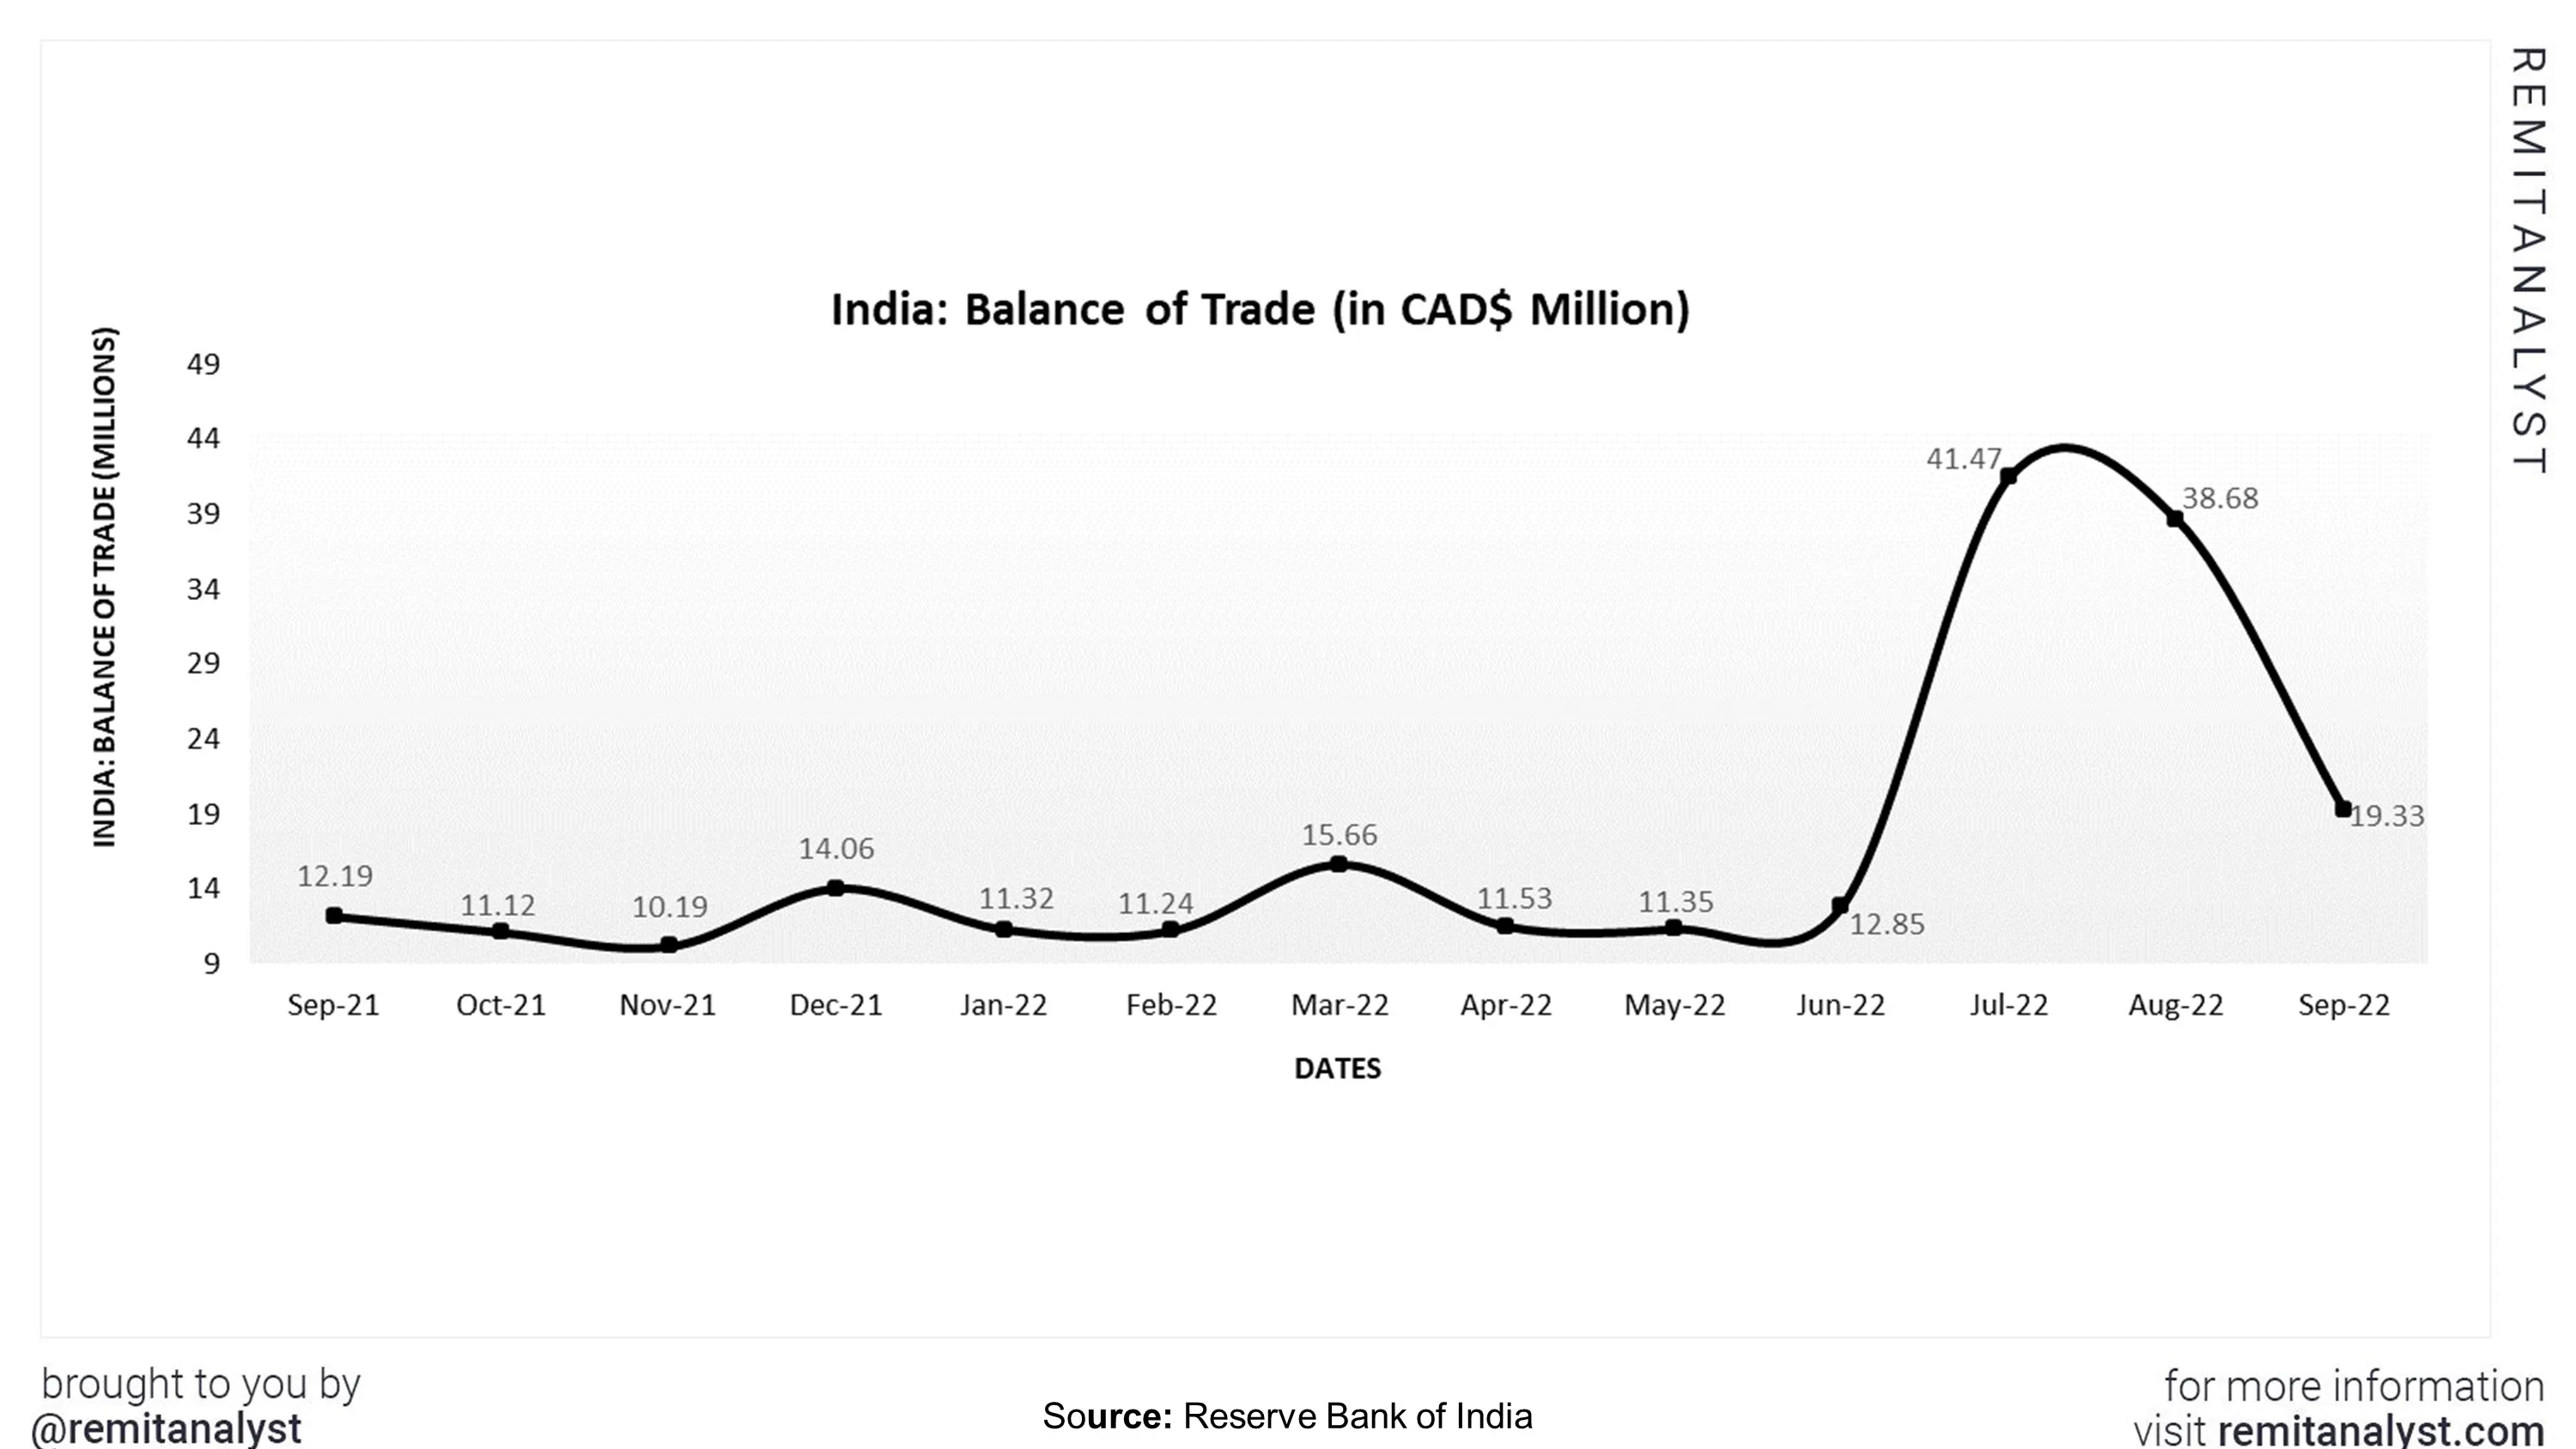 balance-of-trade-india-sep-from-sep-2021-to-sep-2022